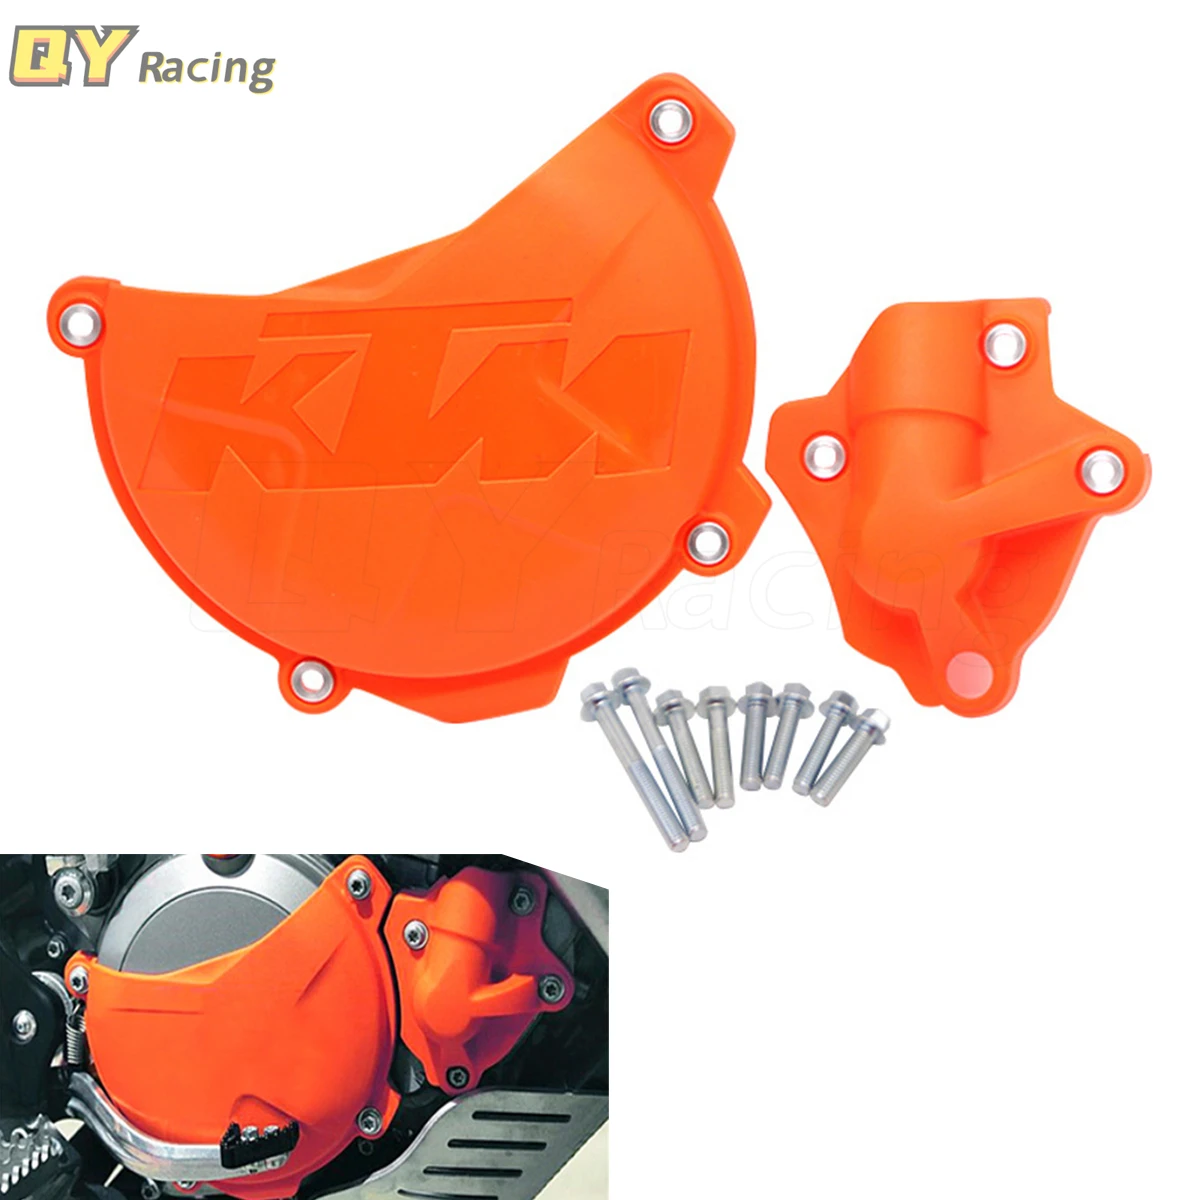 

Clutch Cover Water Pump Guard Protector Oil Fuel Filler Cap For KTM 250 350 SXF EXCF XCF XCFW Freeride SIX DAYS SX-F EXC-F XCF-W